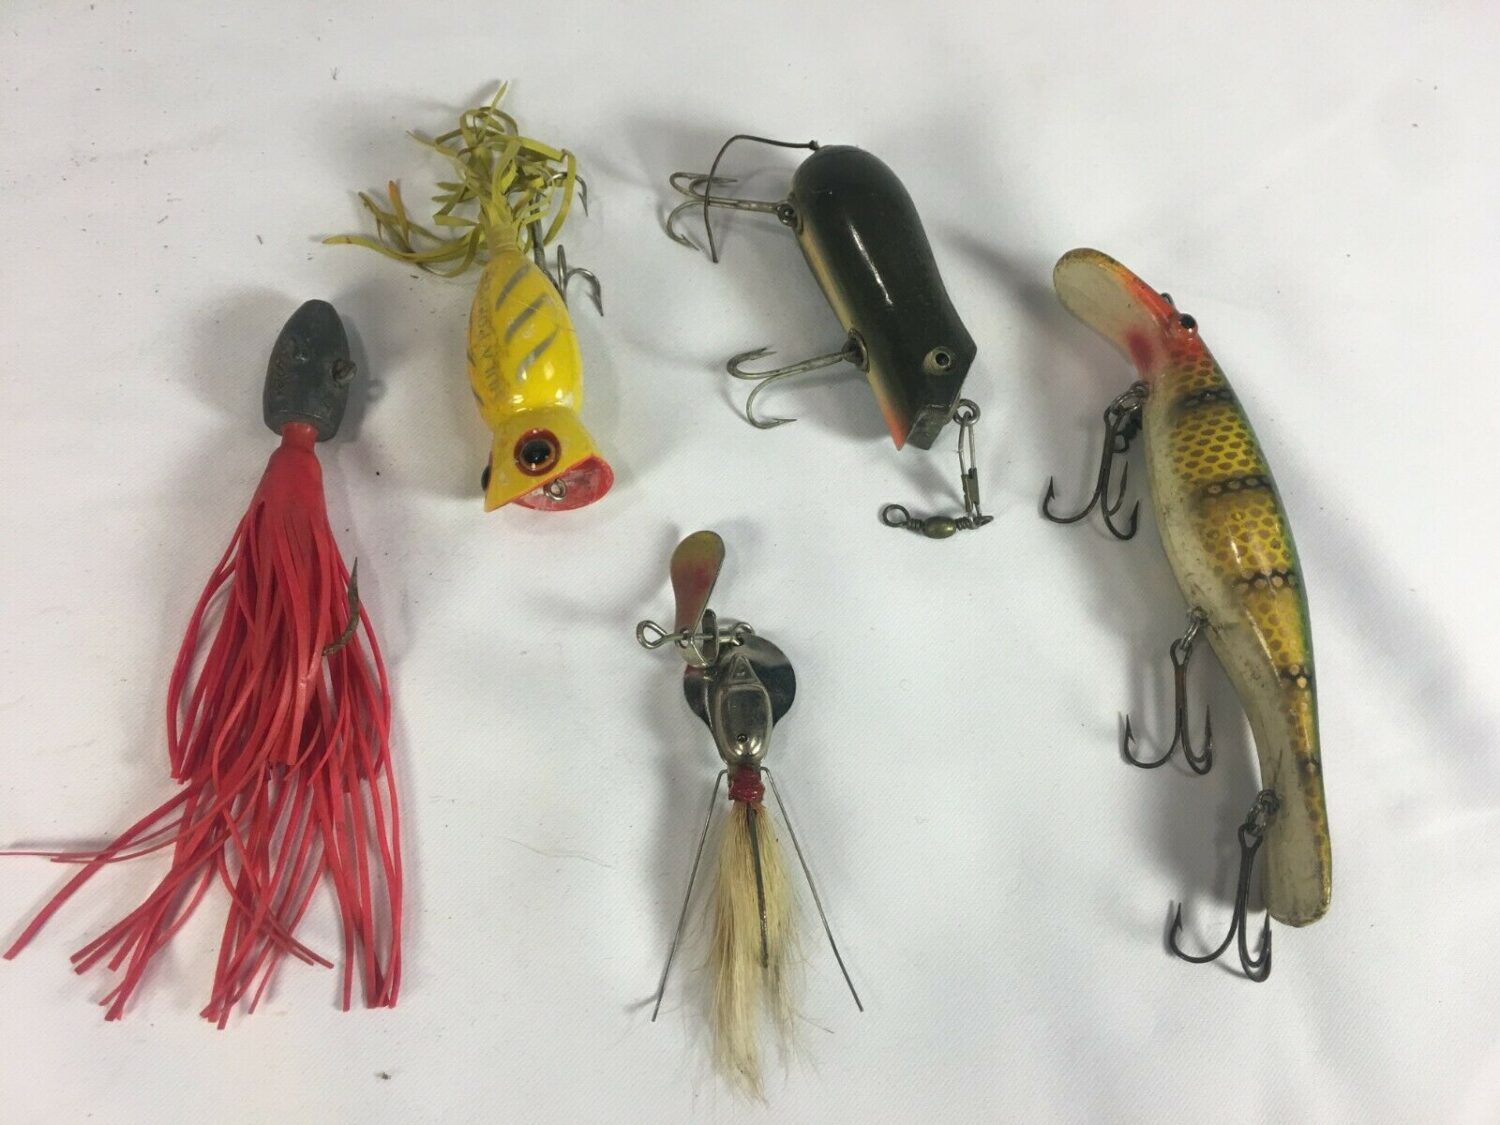 6-VINTAGE FISHING LURES-LLOYDS LUCKY LURES-FLY ROD BASS POPPERS-MINT IN  PACKAGE